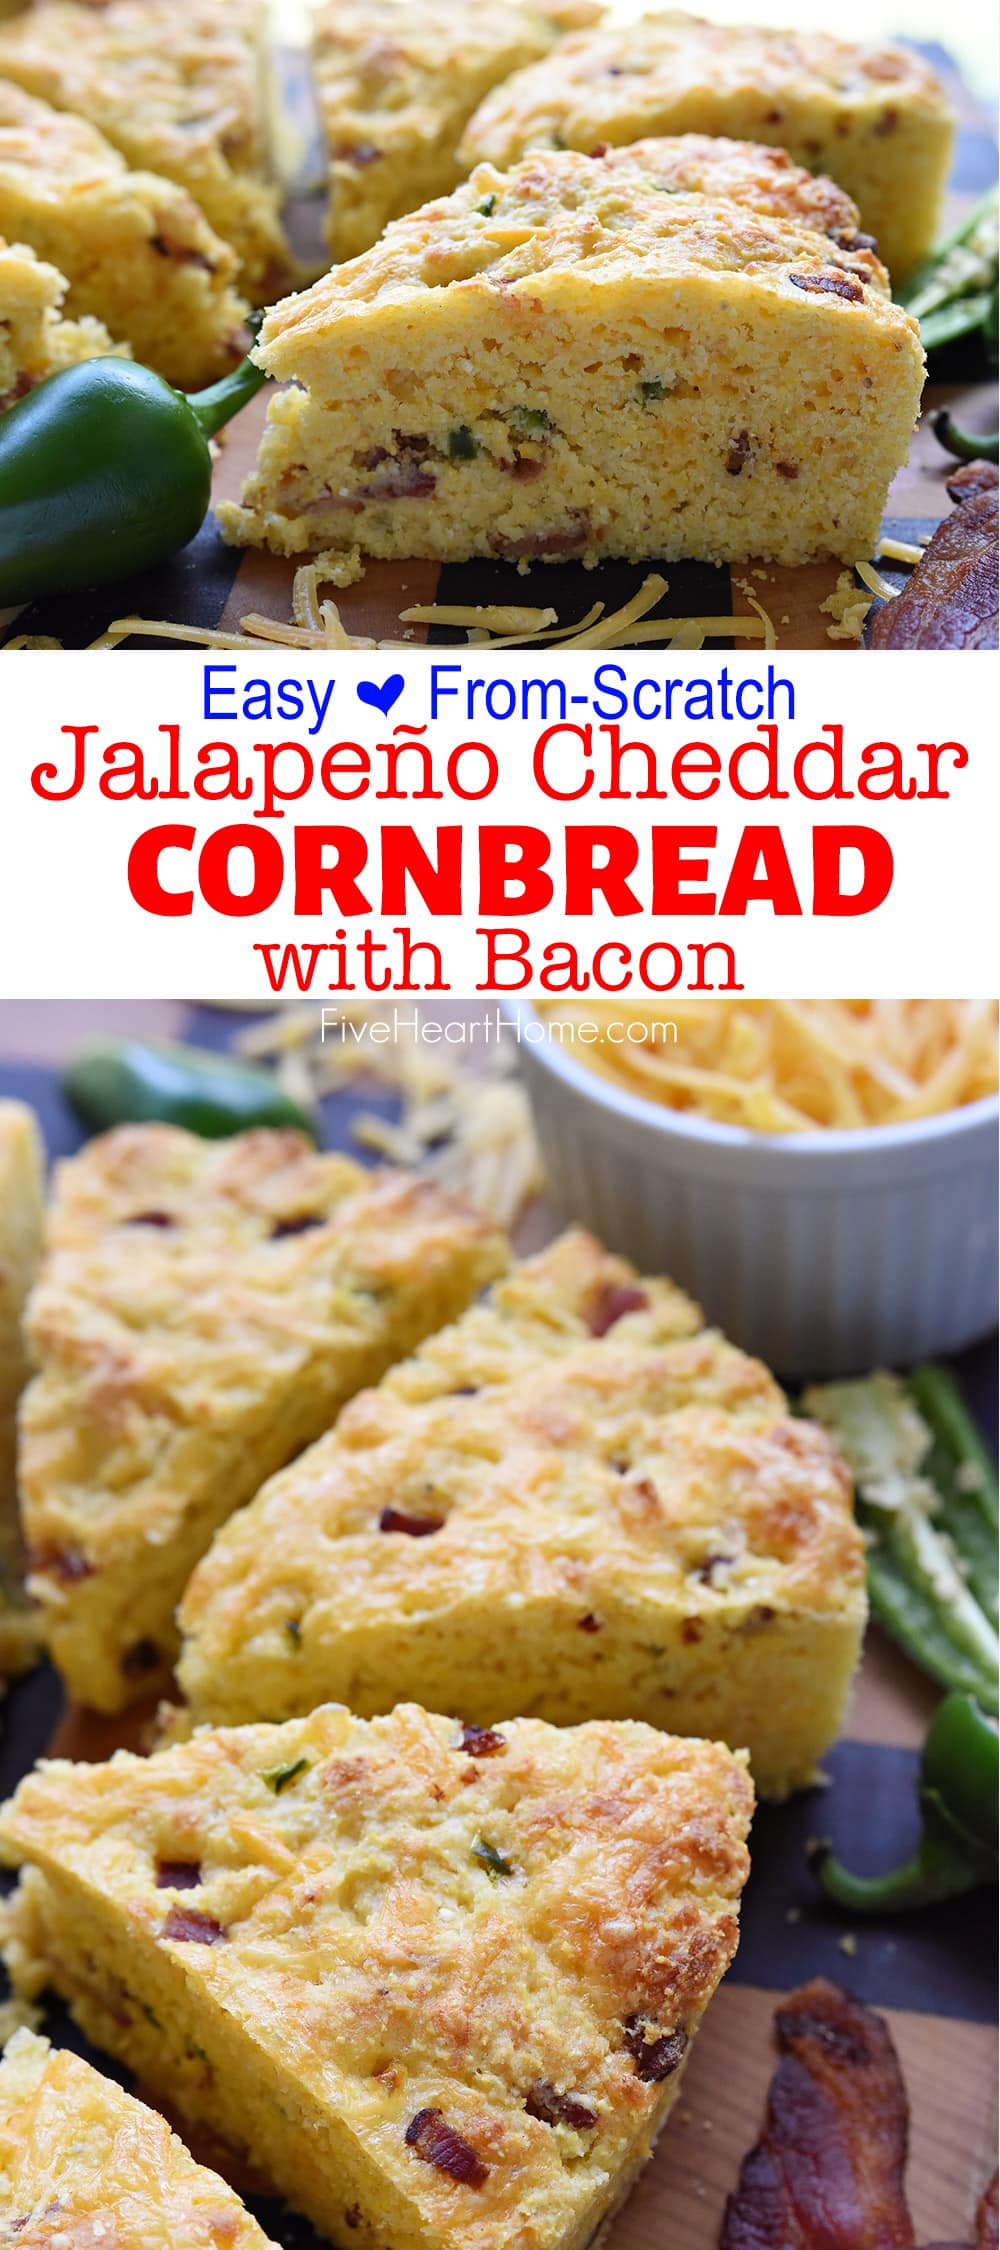 Jalapeño Cheddar Cornbread with Bacon ~ this from-scratch cornbread is moist, tender, and loaded with flavor...the perfect accompaniment for all of your favorite soups, stews, and chilis! | FiveHeartHome.com via @fivehearthome